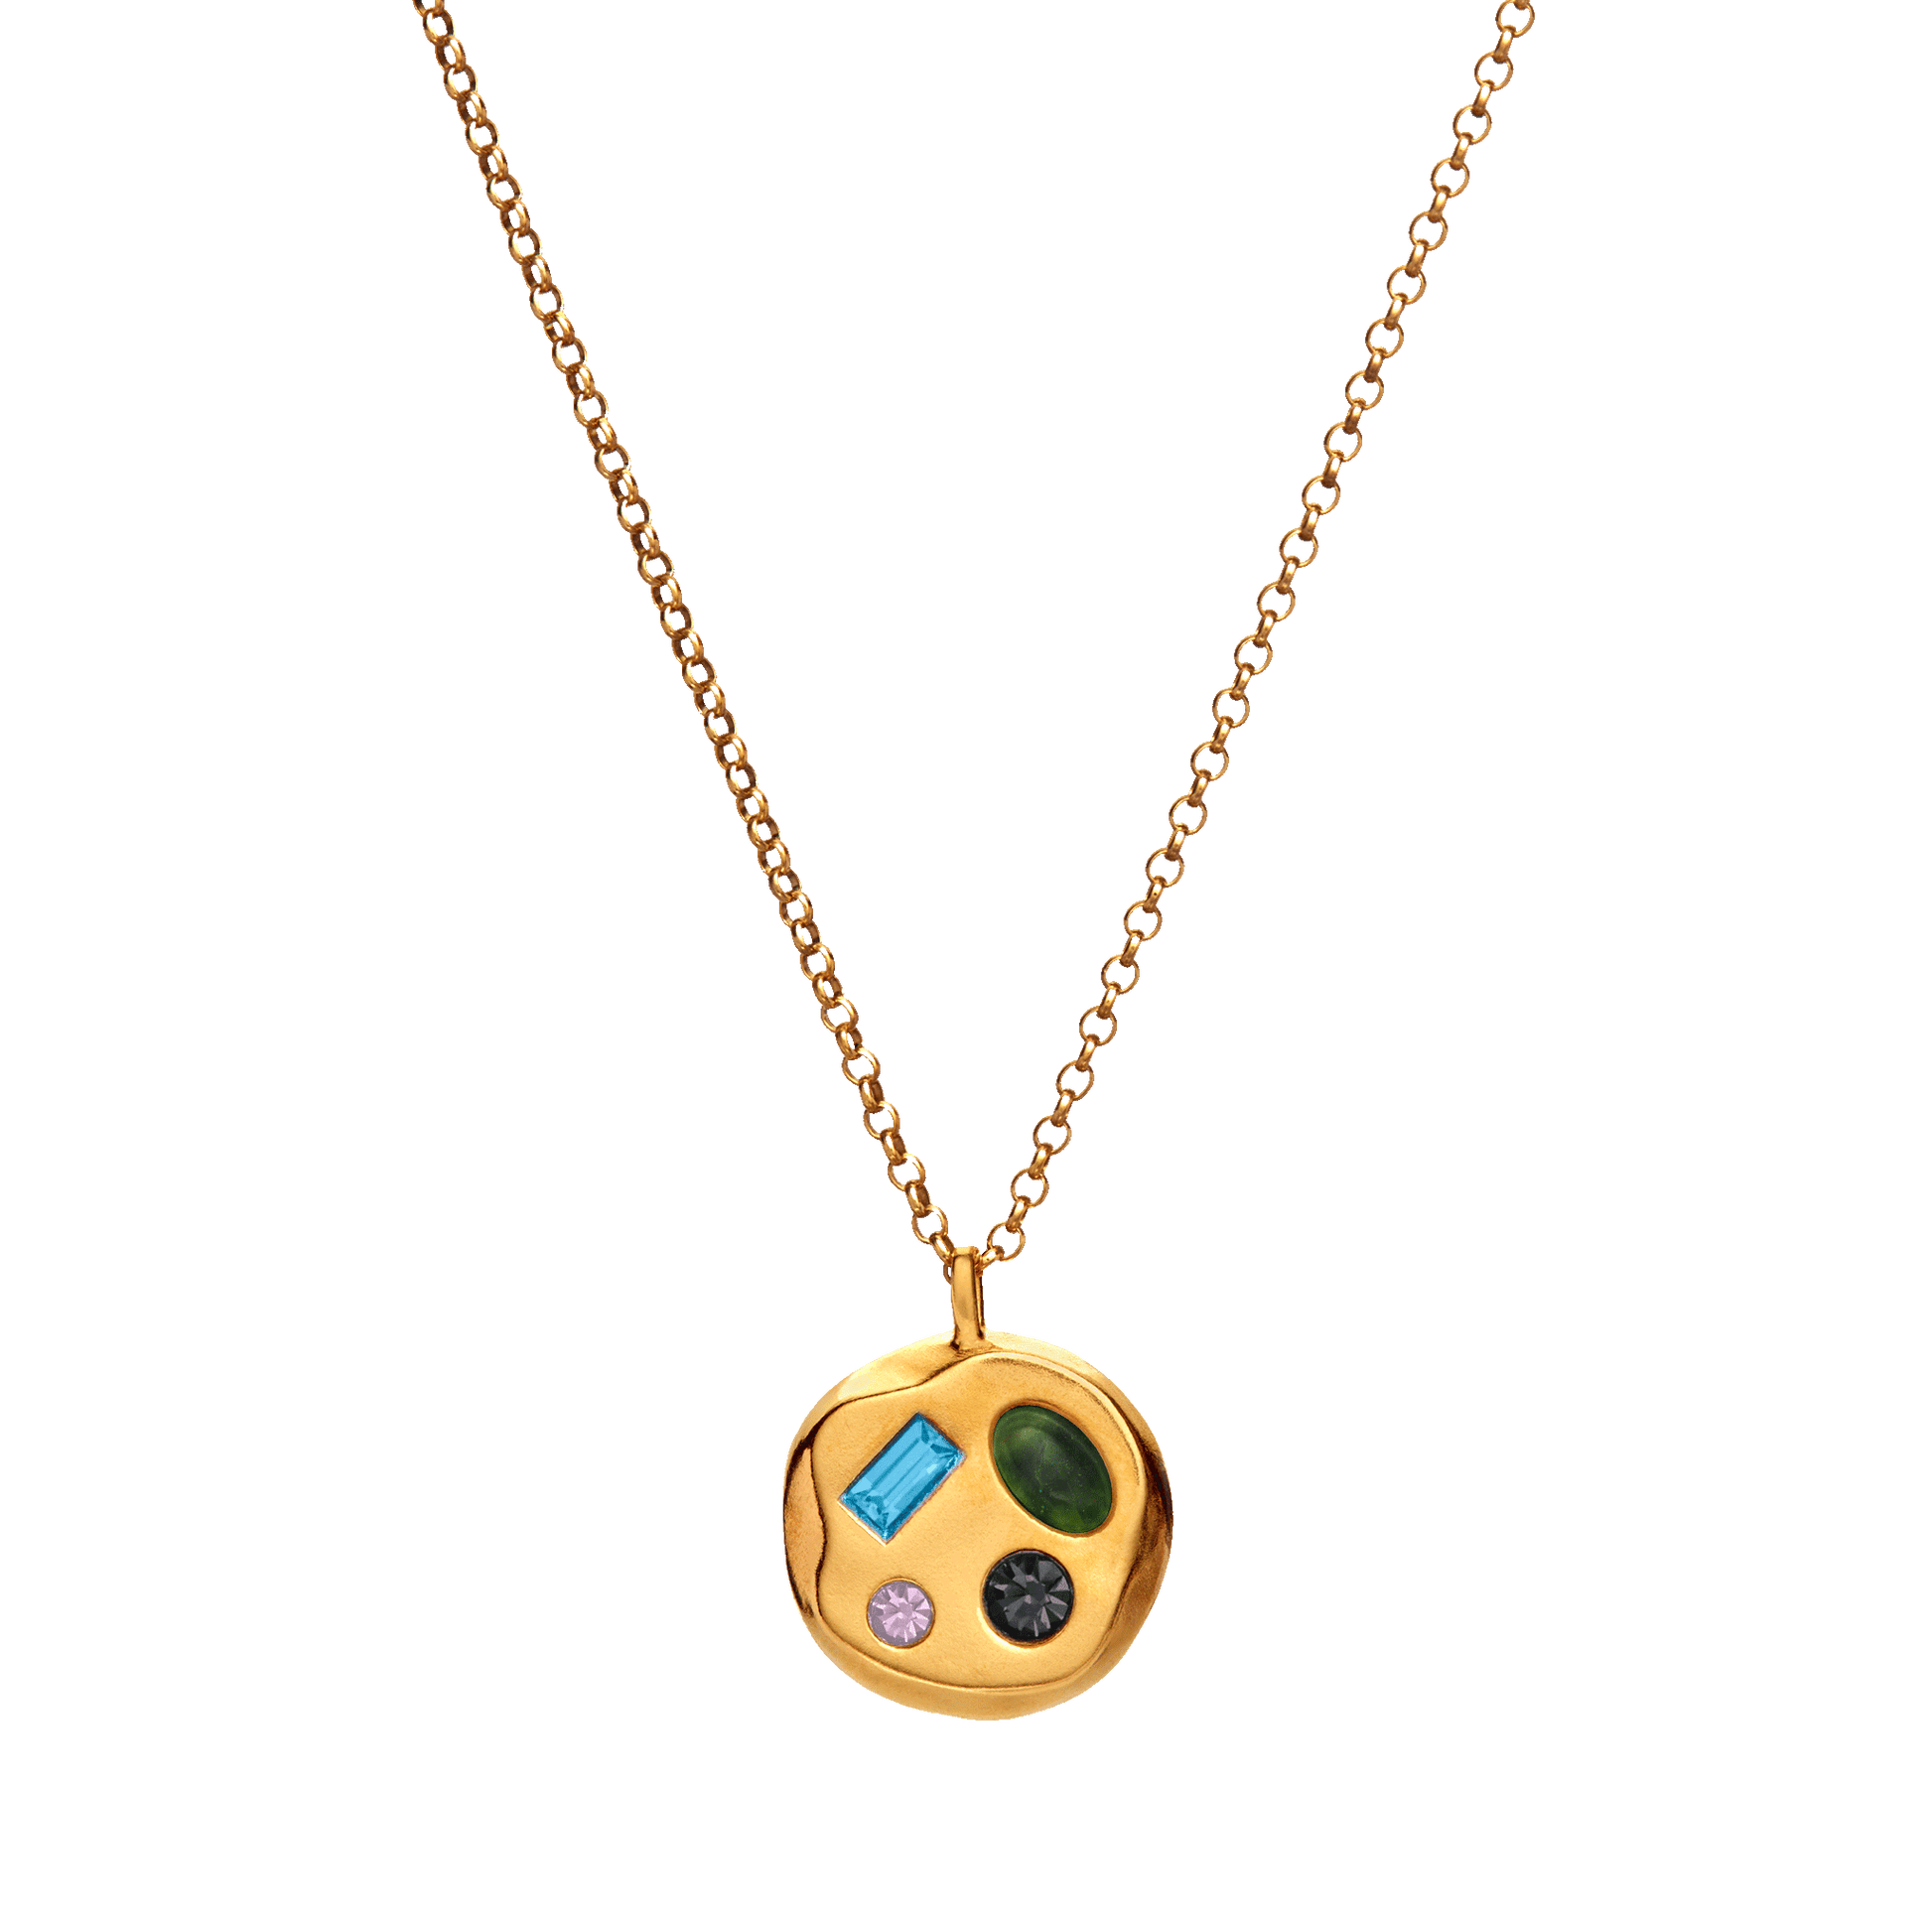 The December Thirty-First Pendant